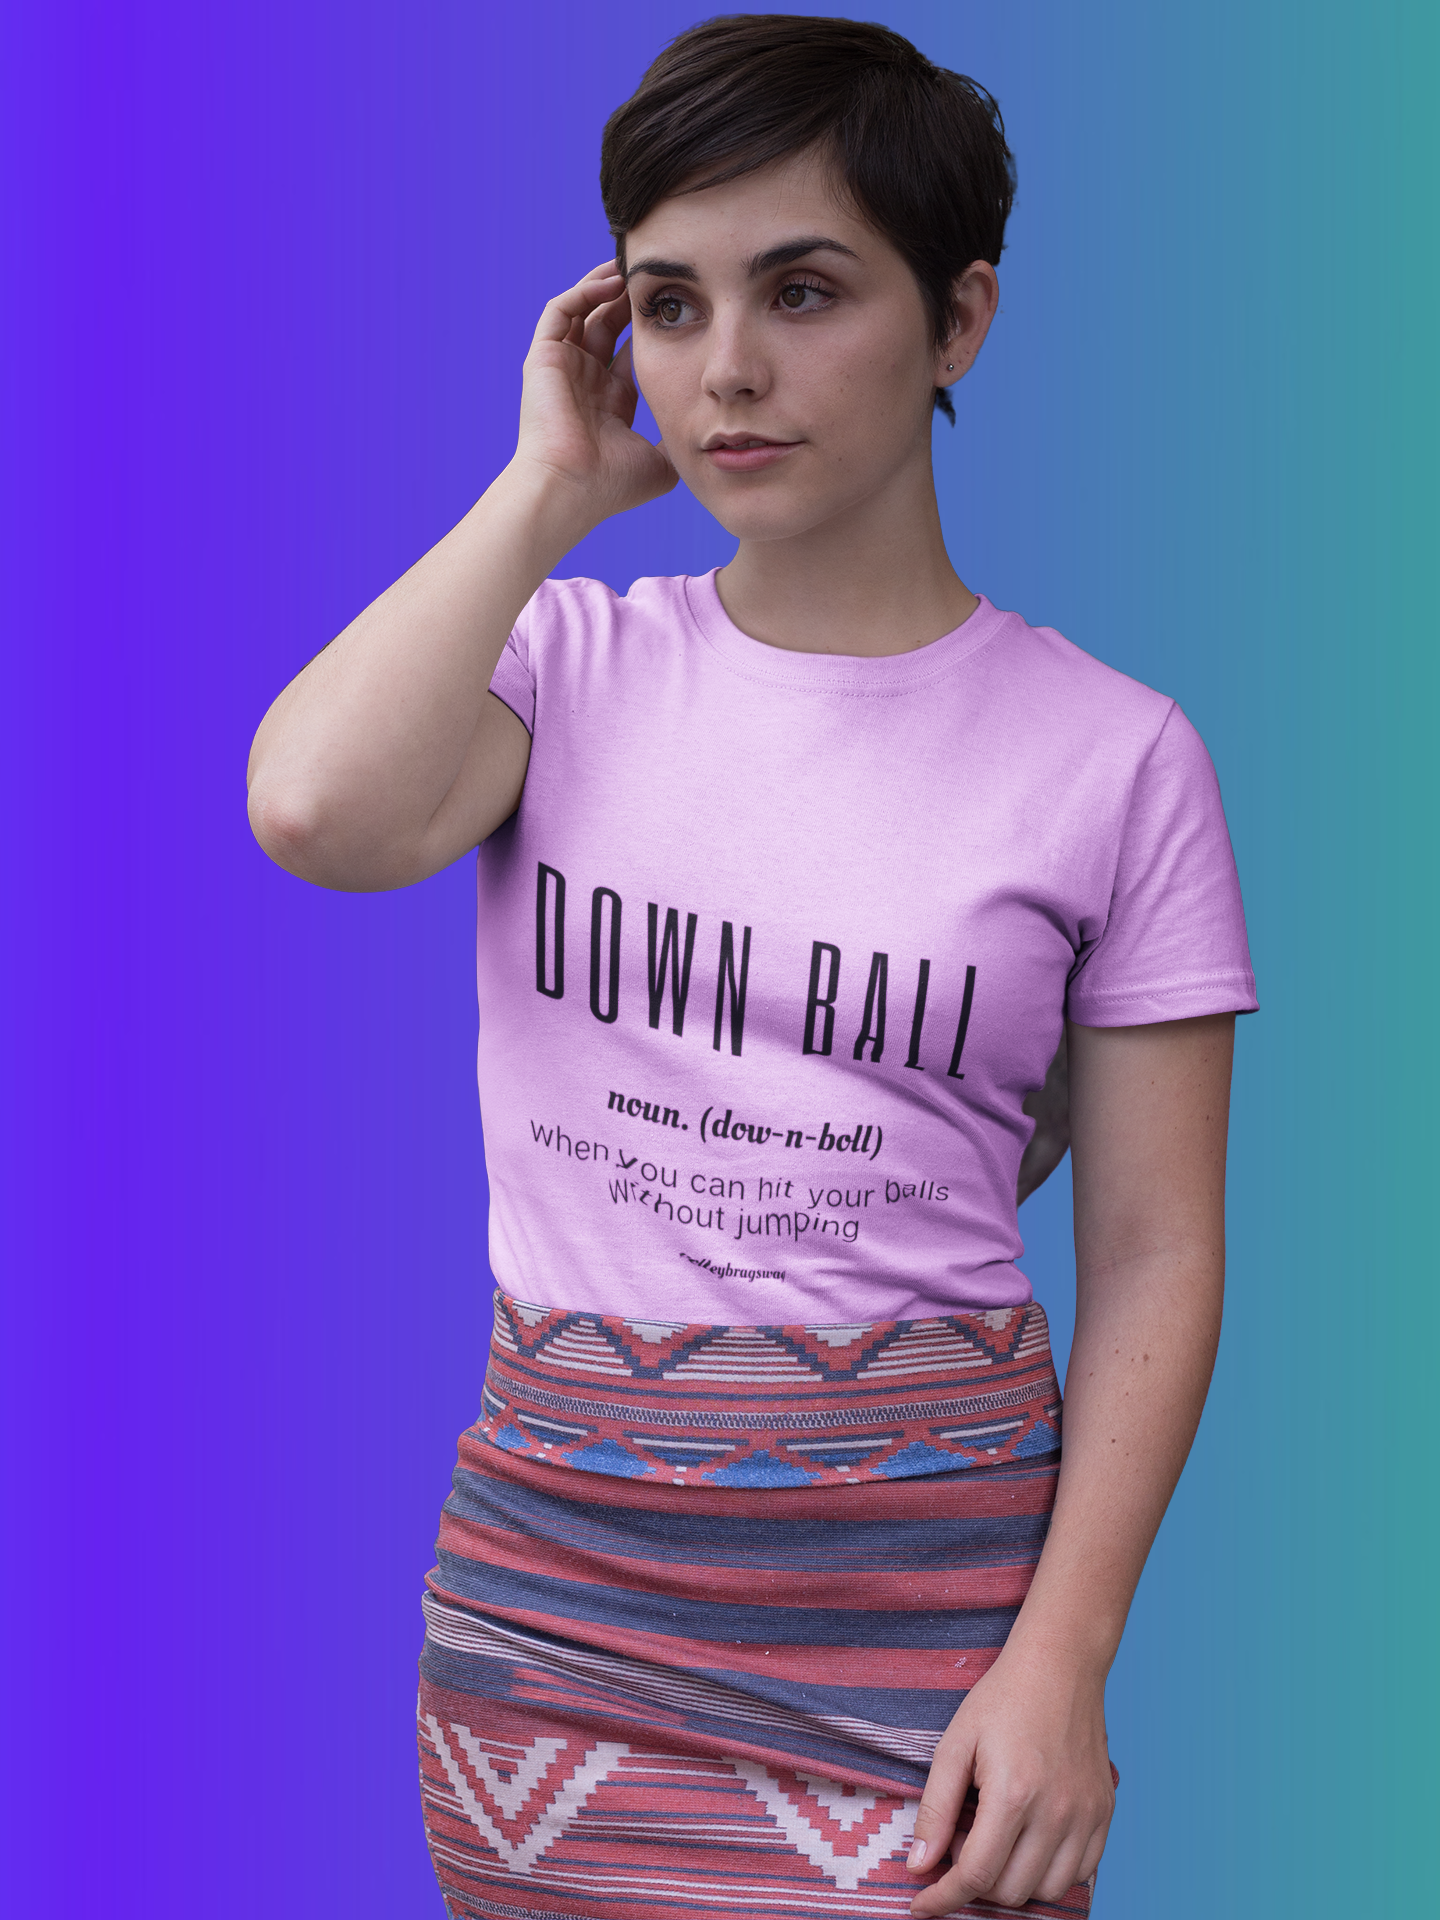 The DOWN BALL Volleyball shirt - when you can hit your balls without jumping. Shop this shirt now on ETSY.